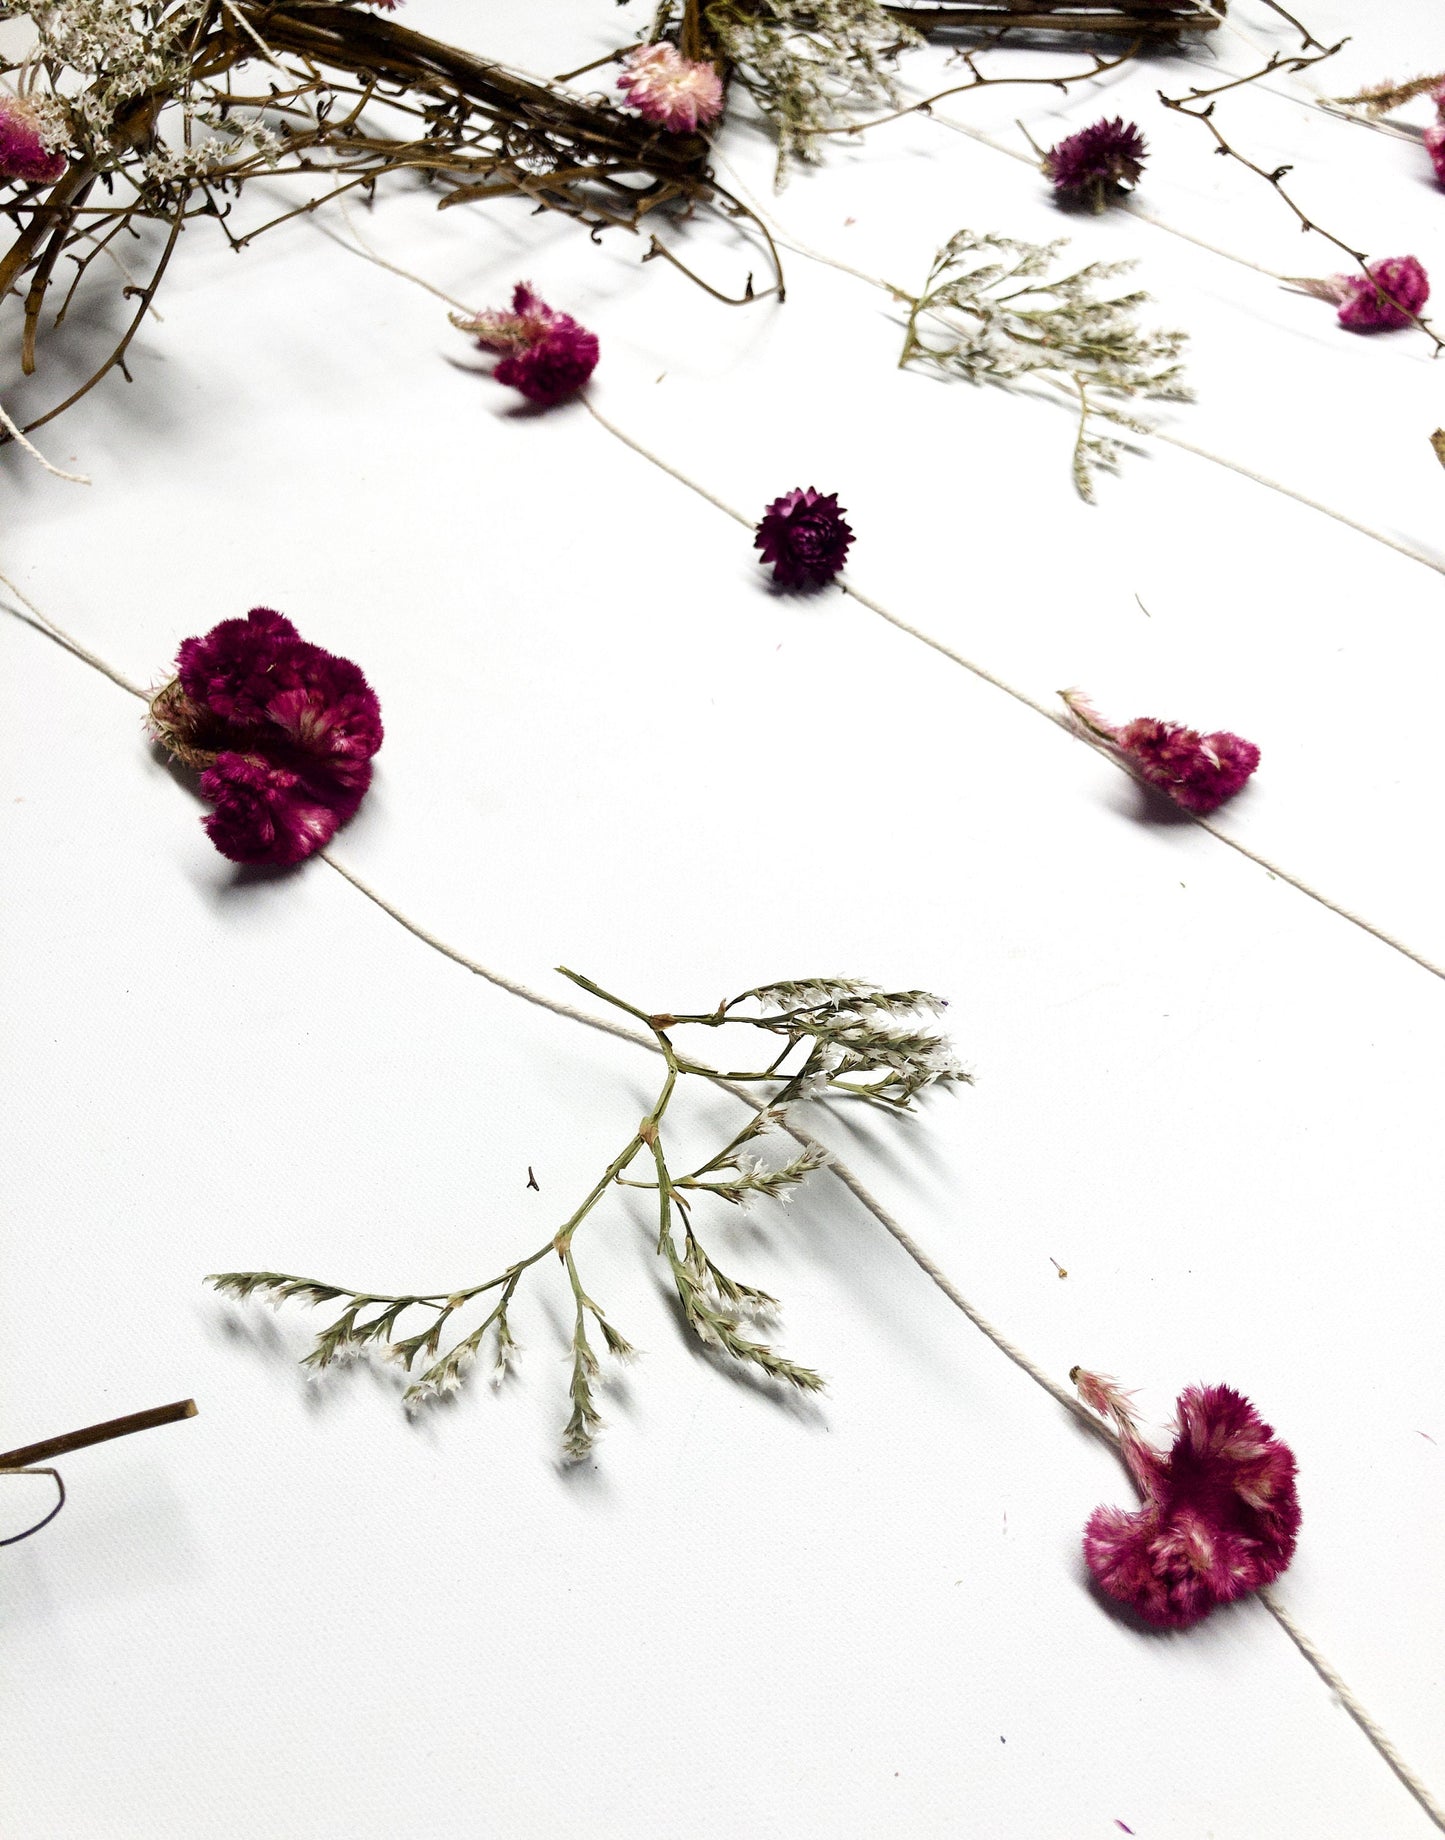 Floral Wall Decor, Dried Flowers, Art, Floral, Wall, Branches, Twigs, Preserved, Nursery, Bedroom Decor, Nook Decor, Rustic Farmhouse